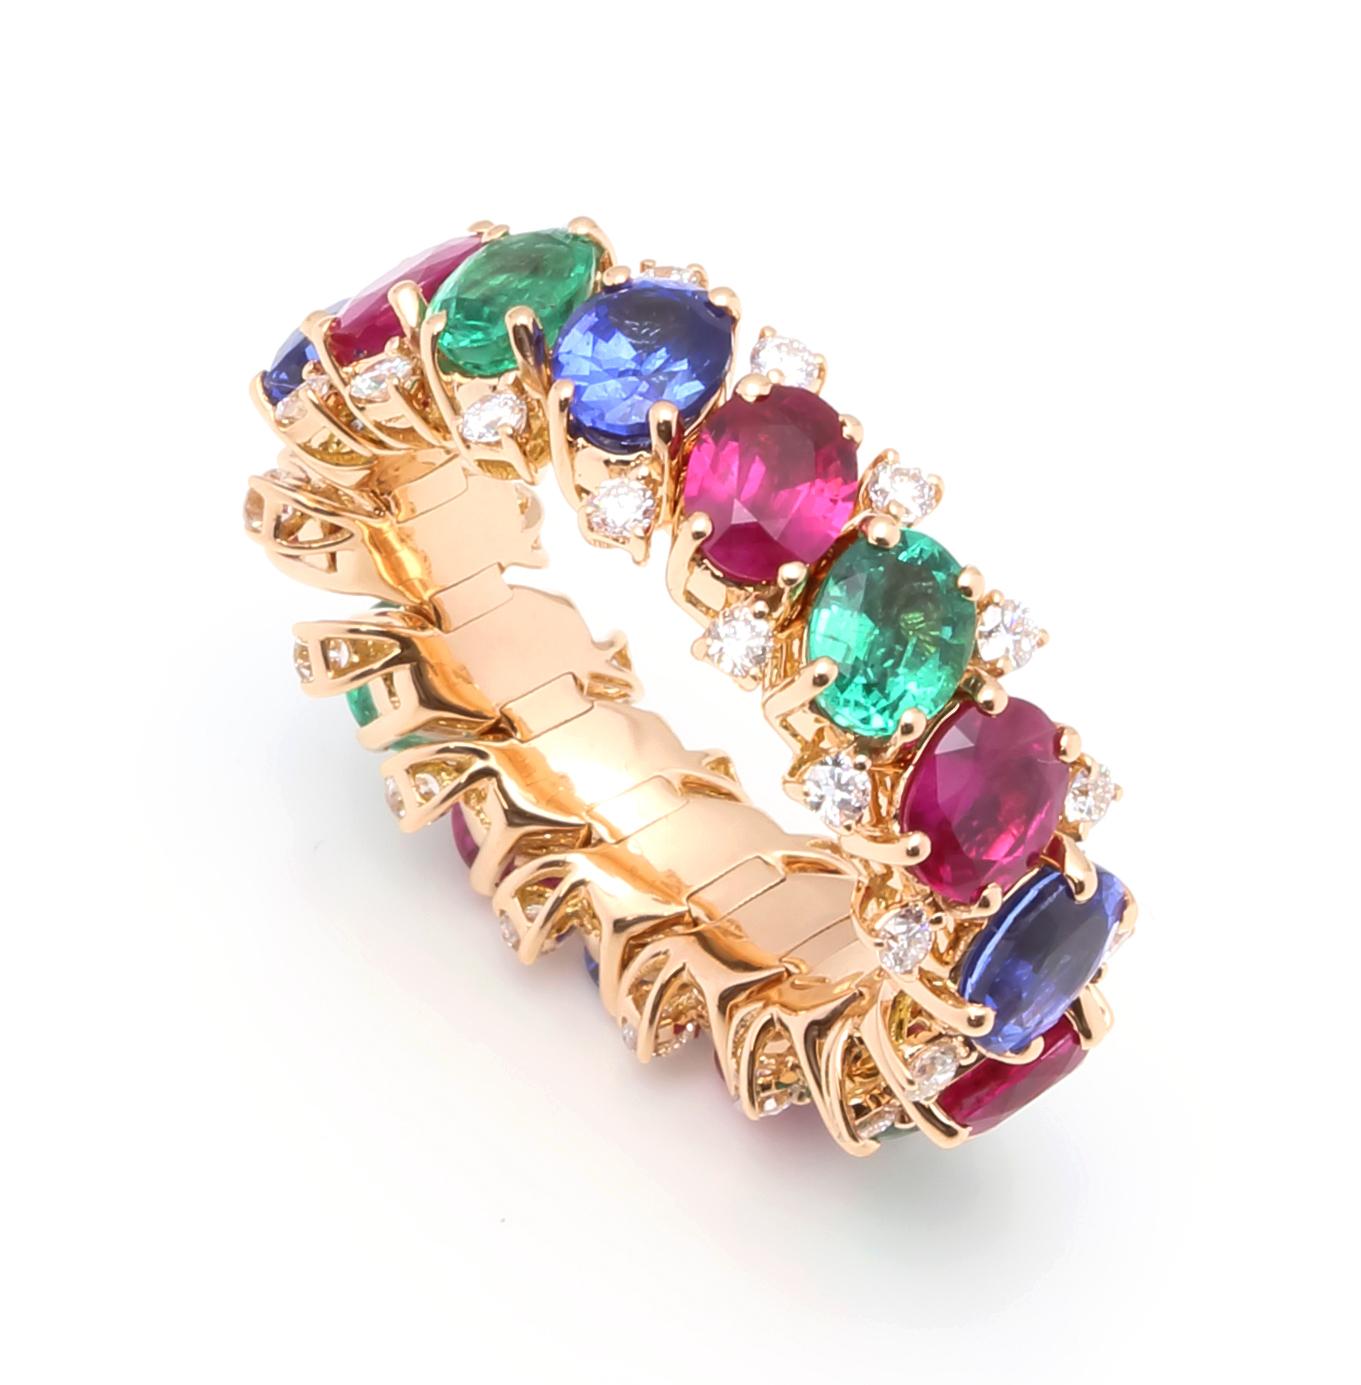 Tartan Classic Colors Ring

Diamond Red Ruby Emerald Blue Sapphire Flexible Eternity Band 18K Rose Gold Ring

The multicolor Designs inspired by tartan colours (e.g. Chatham, Royal Stewart Tartan). Originally inspired by Shades of tartan, colour